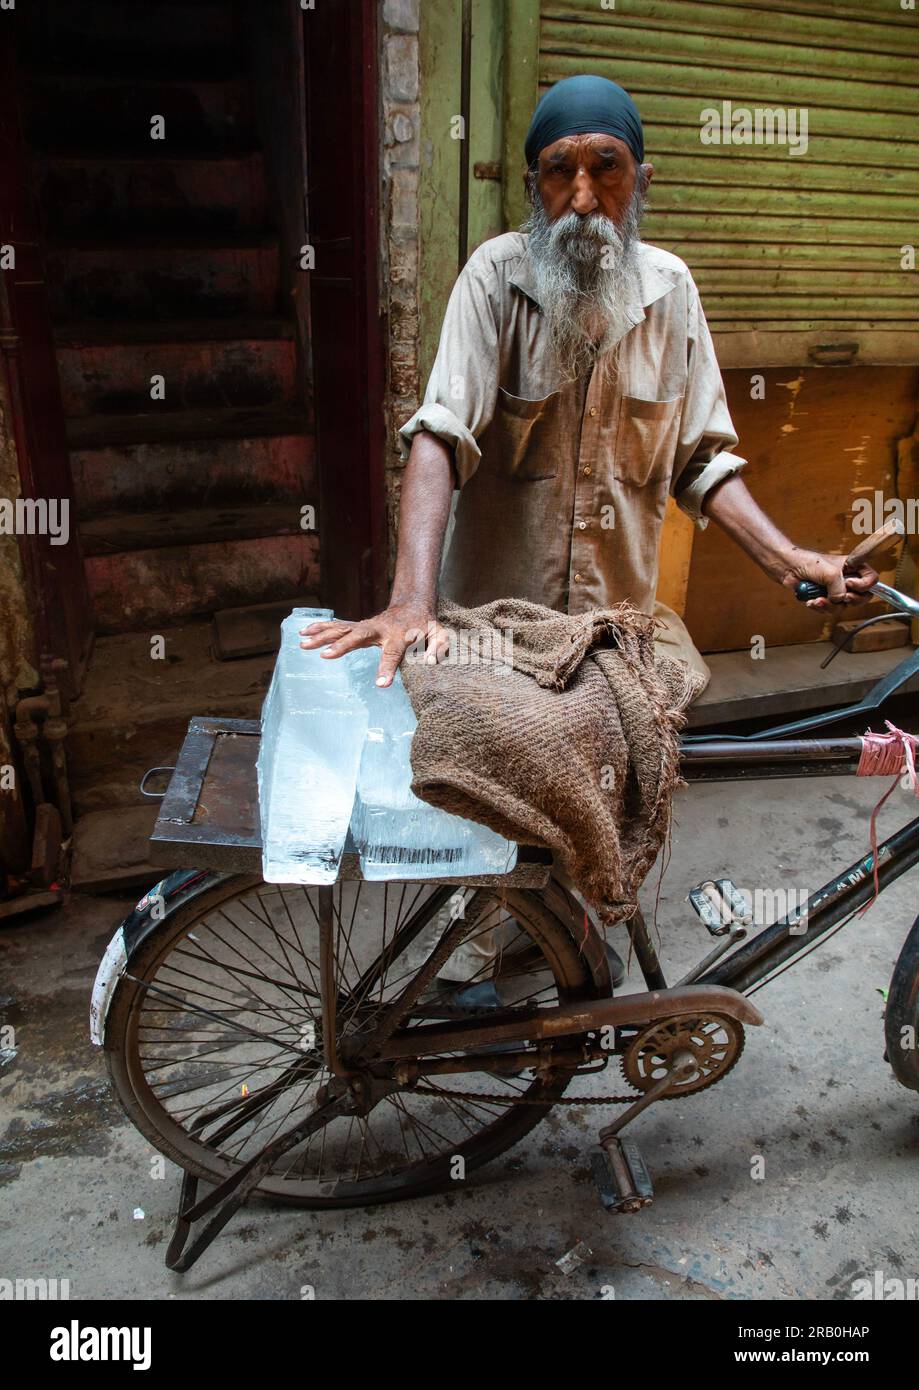 Indian man carrying ice on his bicycle in old Delhi, Delhi, New Delhi, India Stock Photo